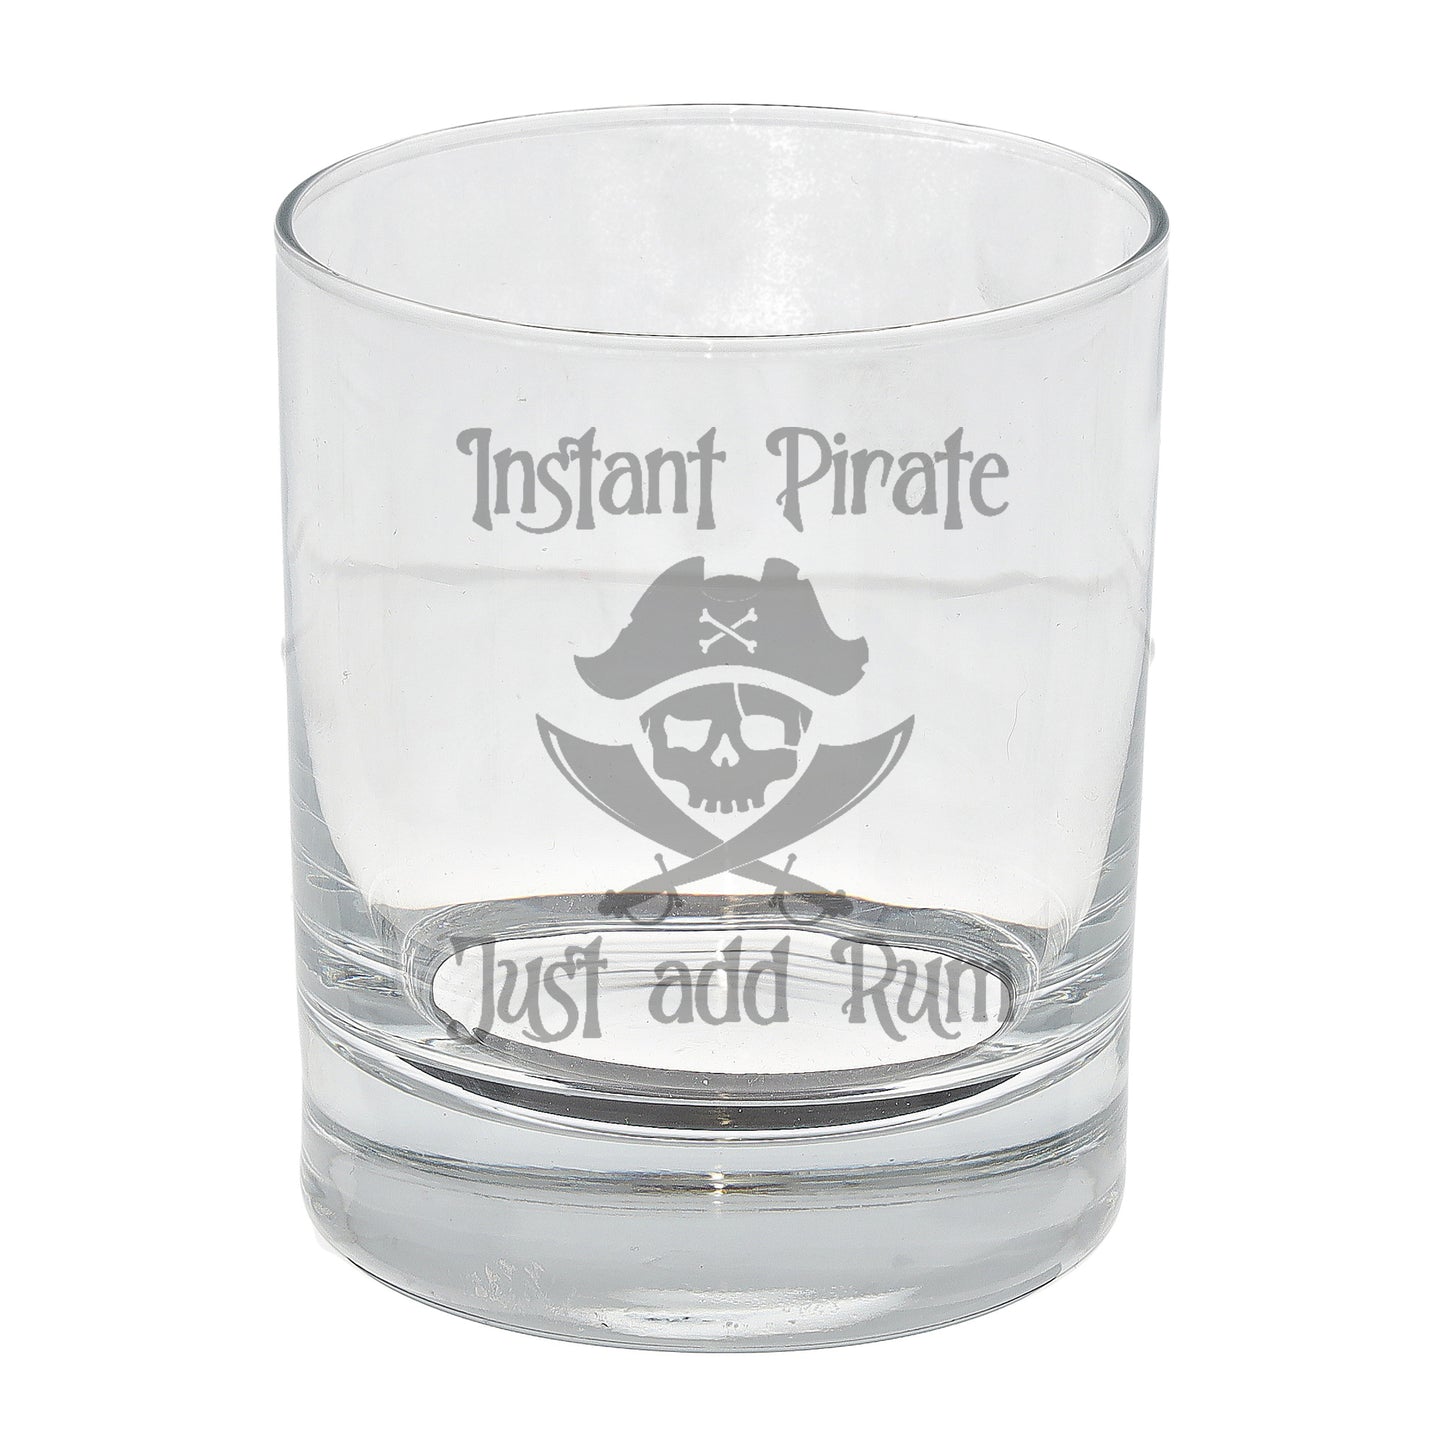 Personalised Engraved "Instant Pirate" Rum Glass and/or Coaster Set  - Always Looking Good -   